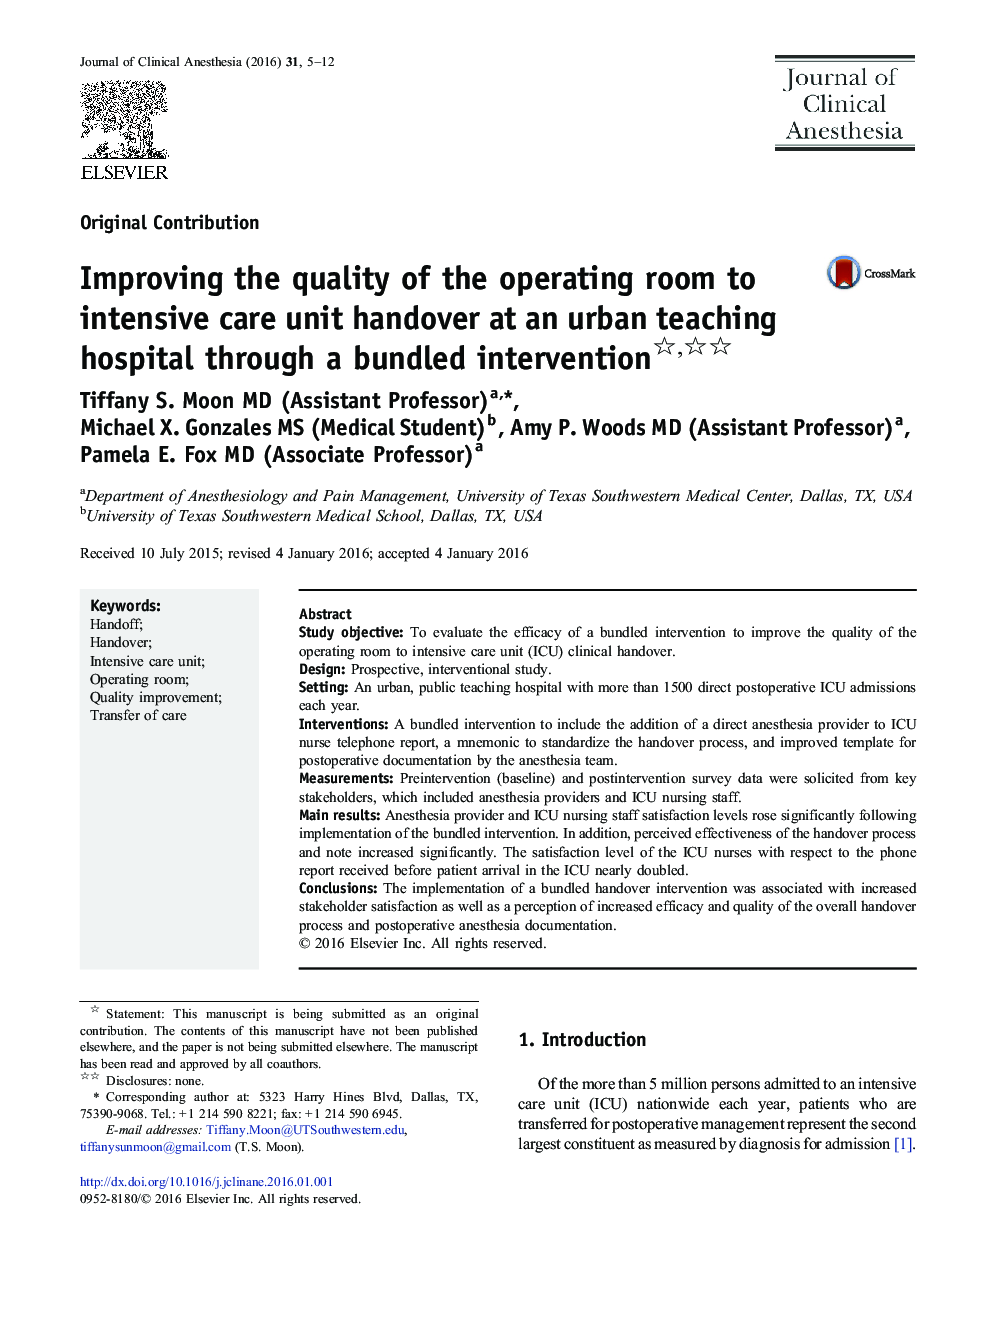 Improving the quality of the operating room to intensive care unit handover at an urban teaching hospital through a bundled intervention